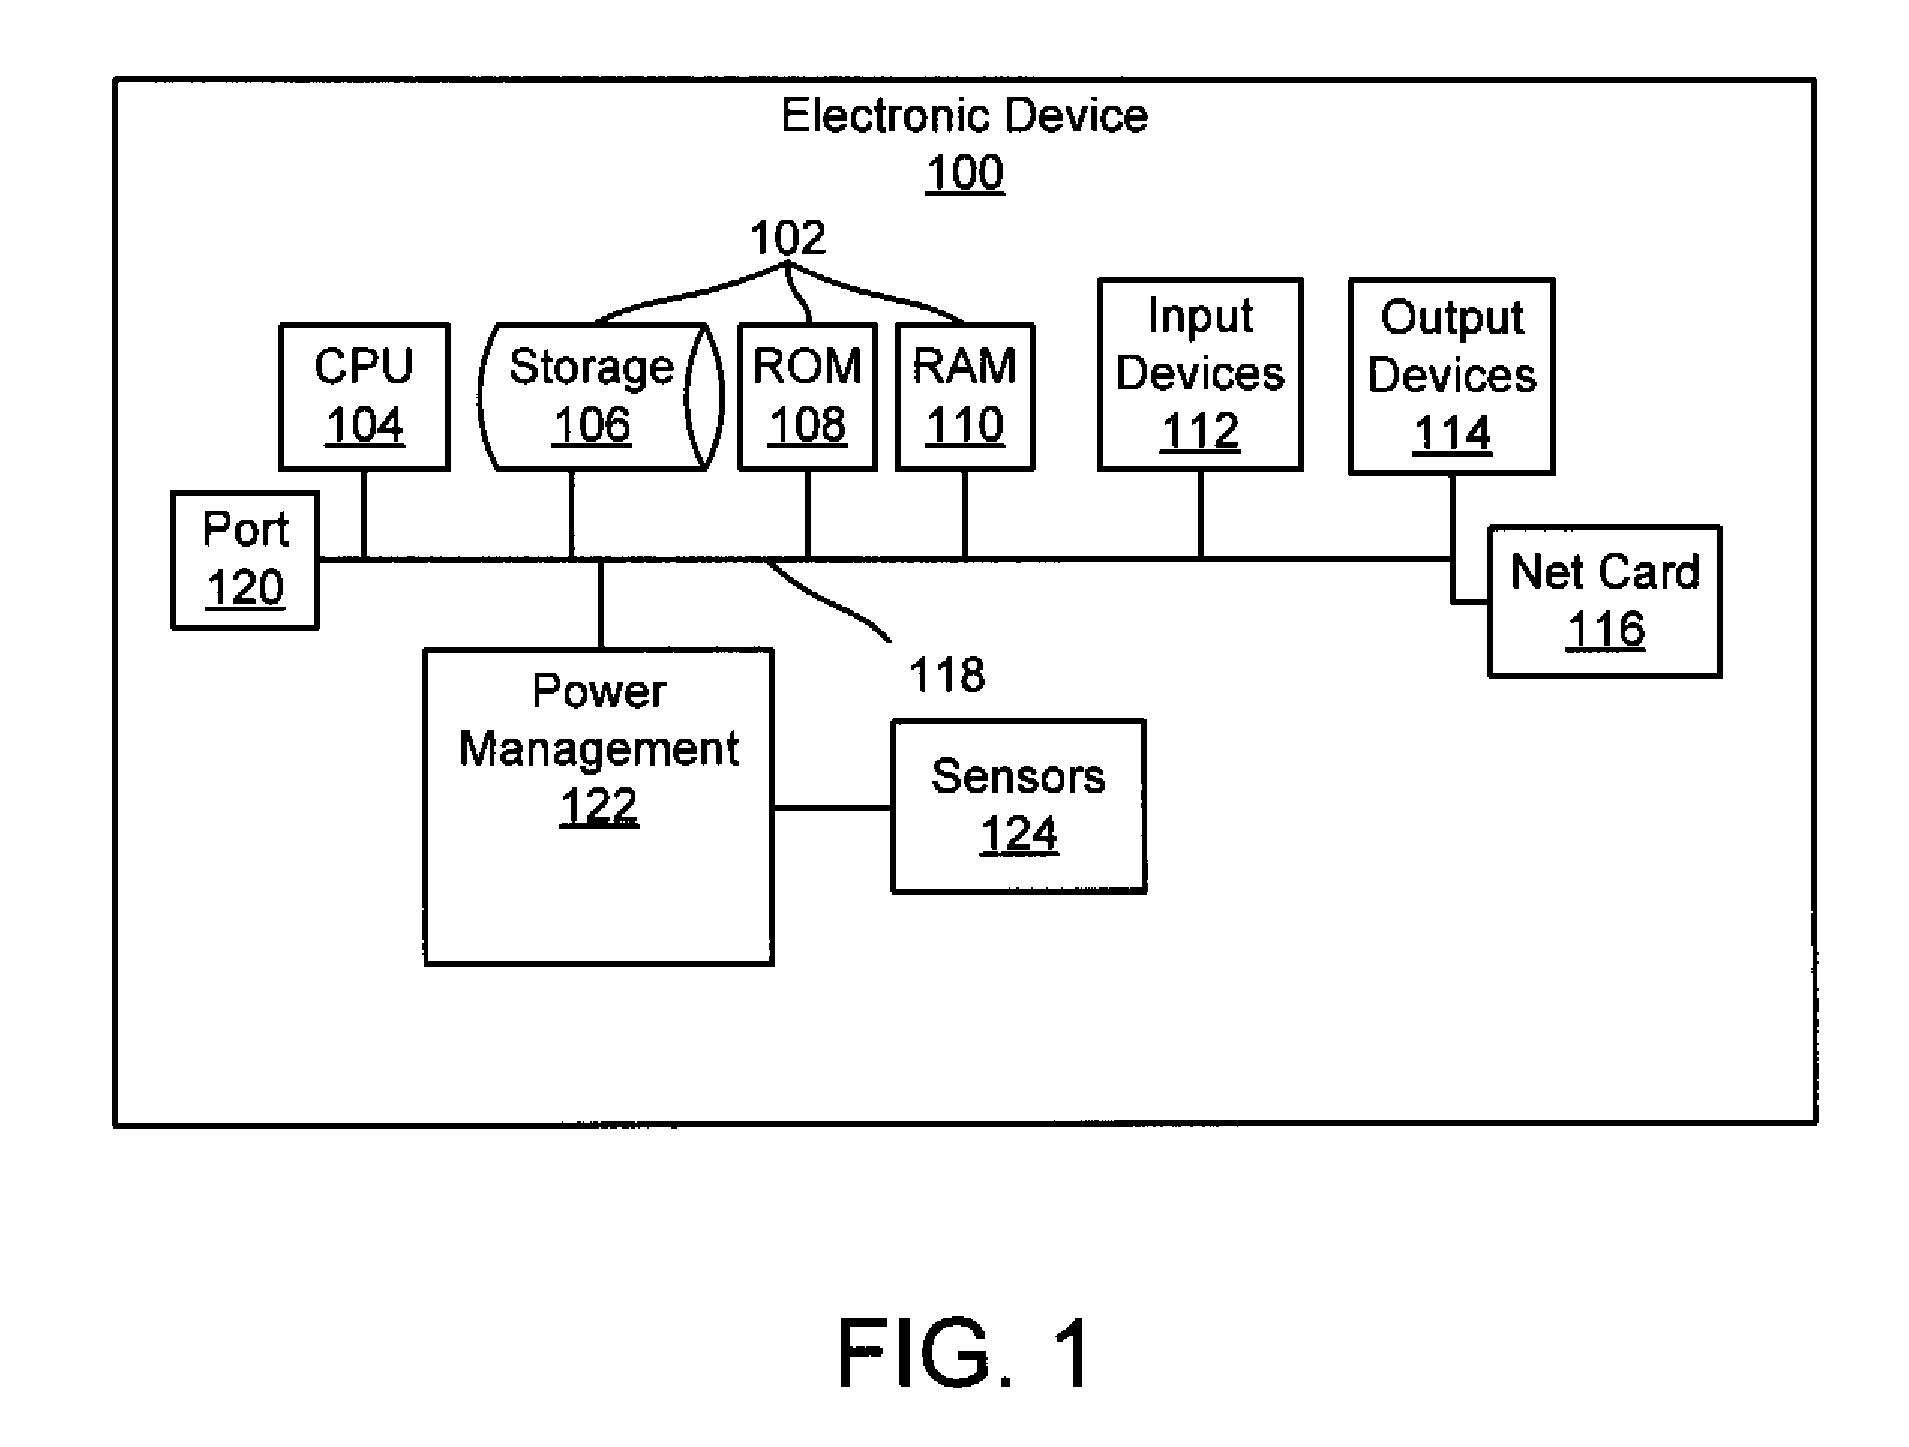 Apparatus, system, and method for improved portable document format (“PDF”) document archiving